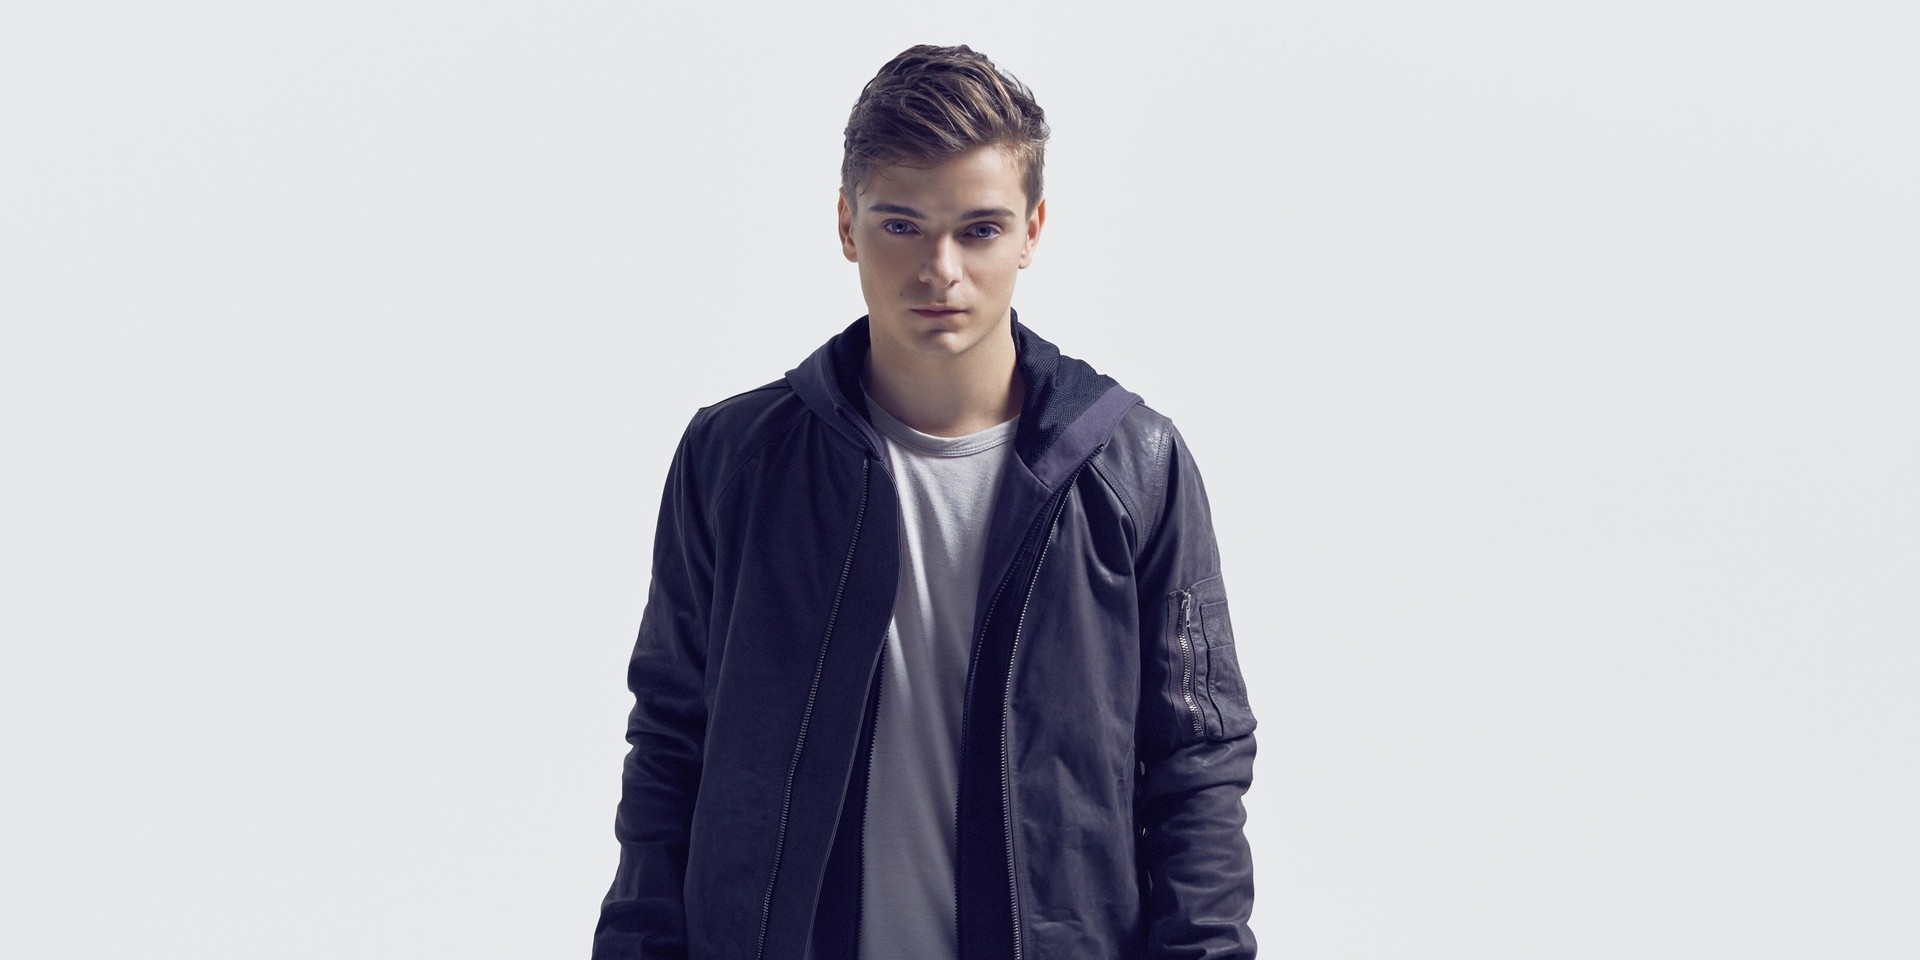 BREAKING: MARTIN GARRIX pulls out of Ultra Singapore, cancels all shows due to injury